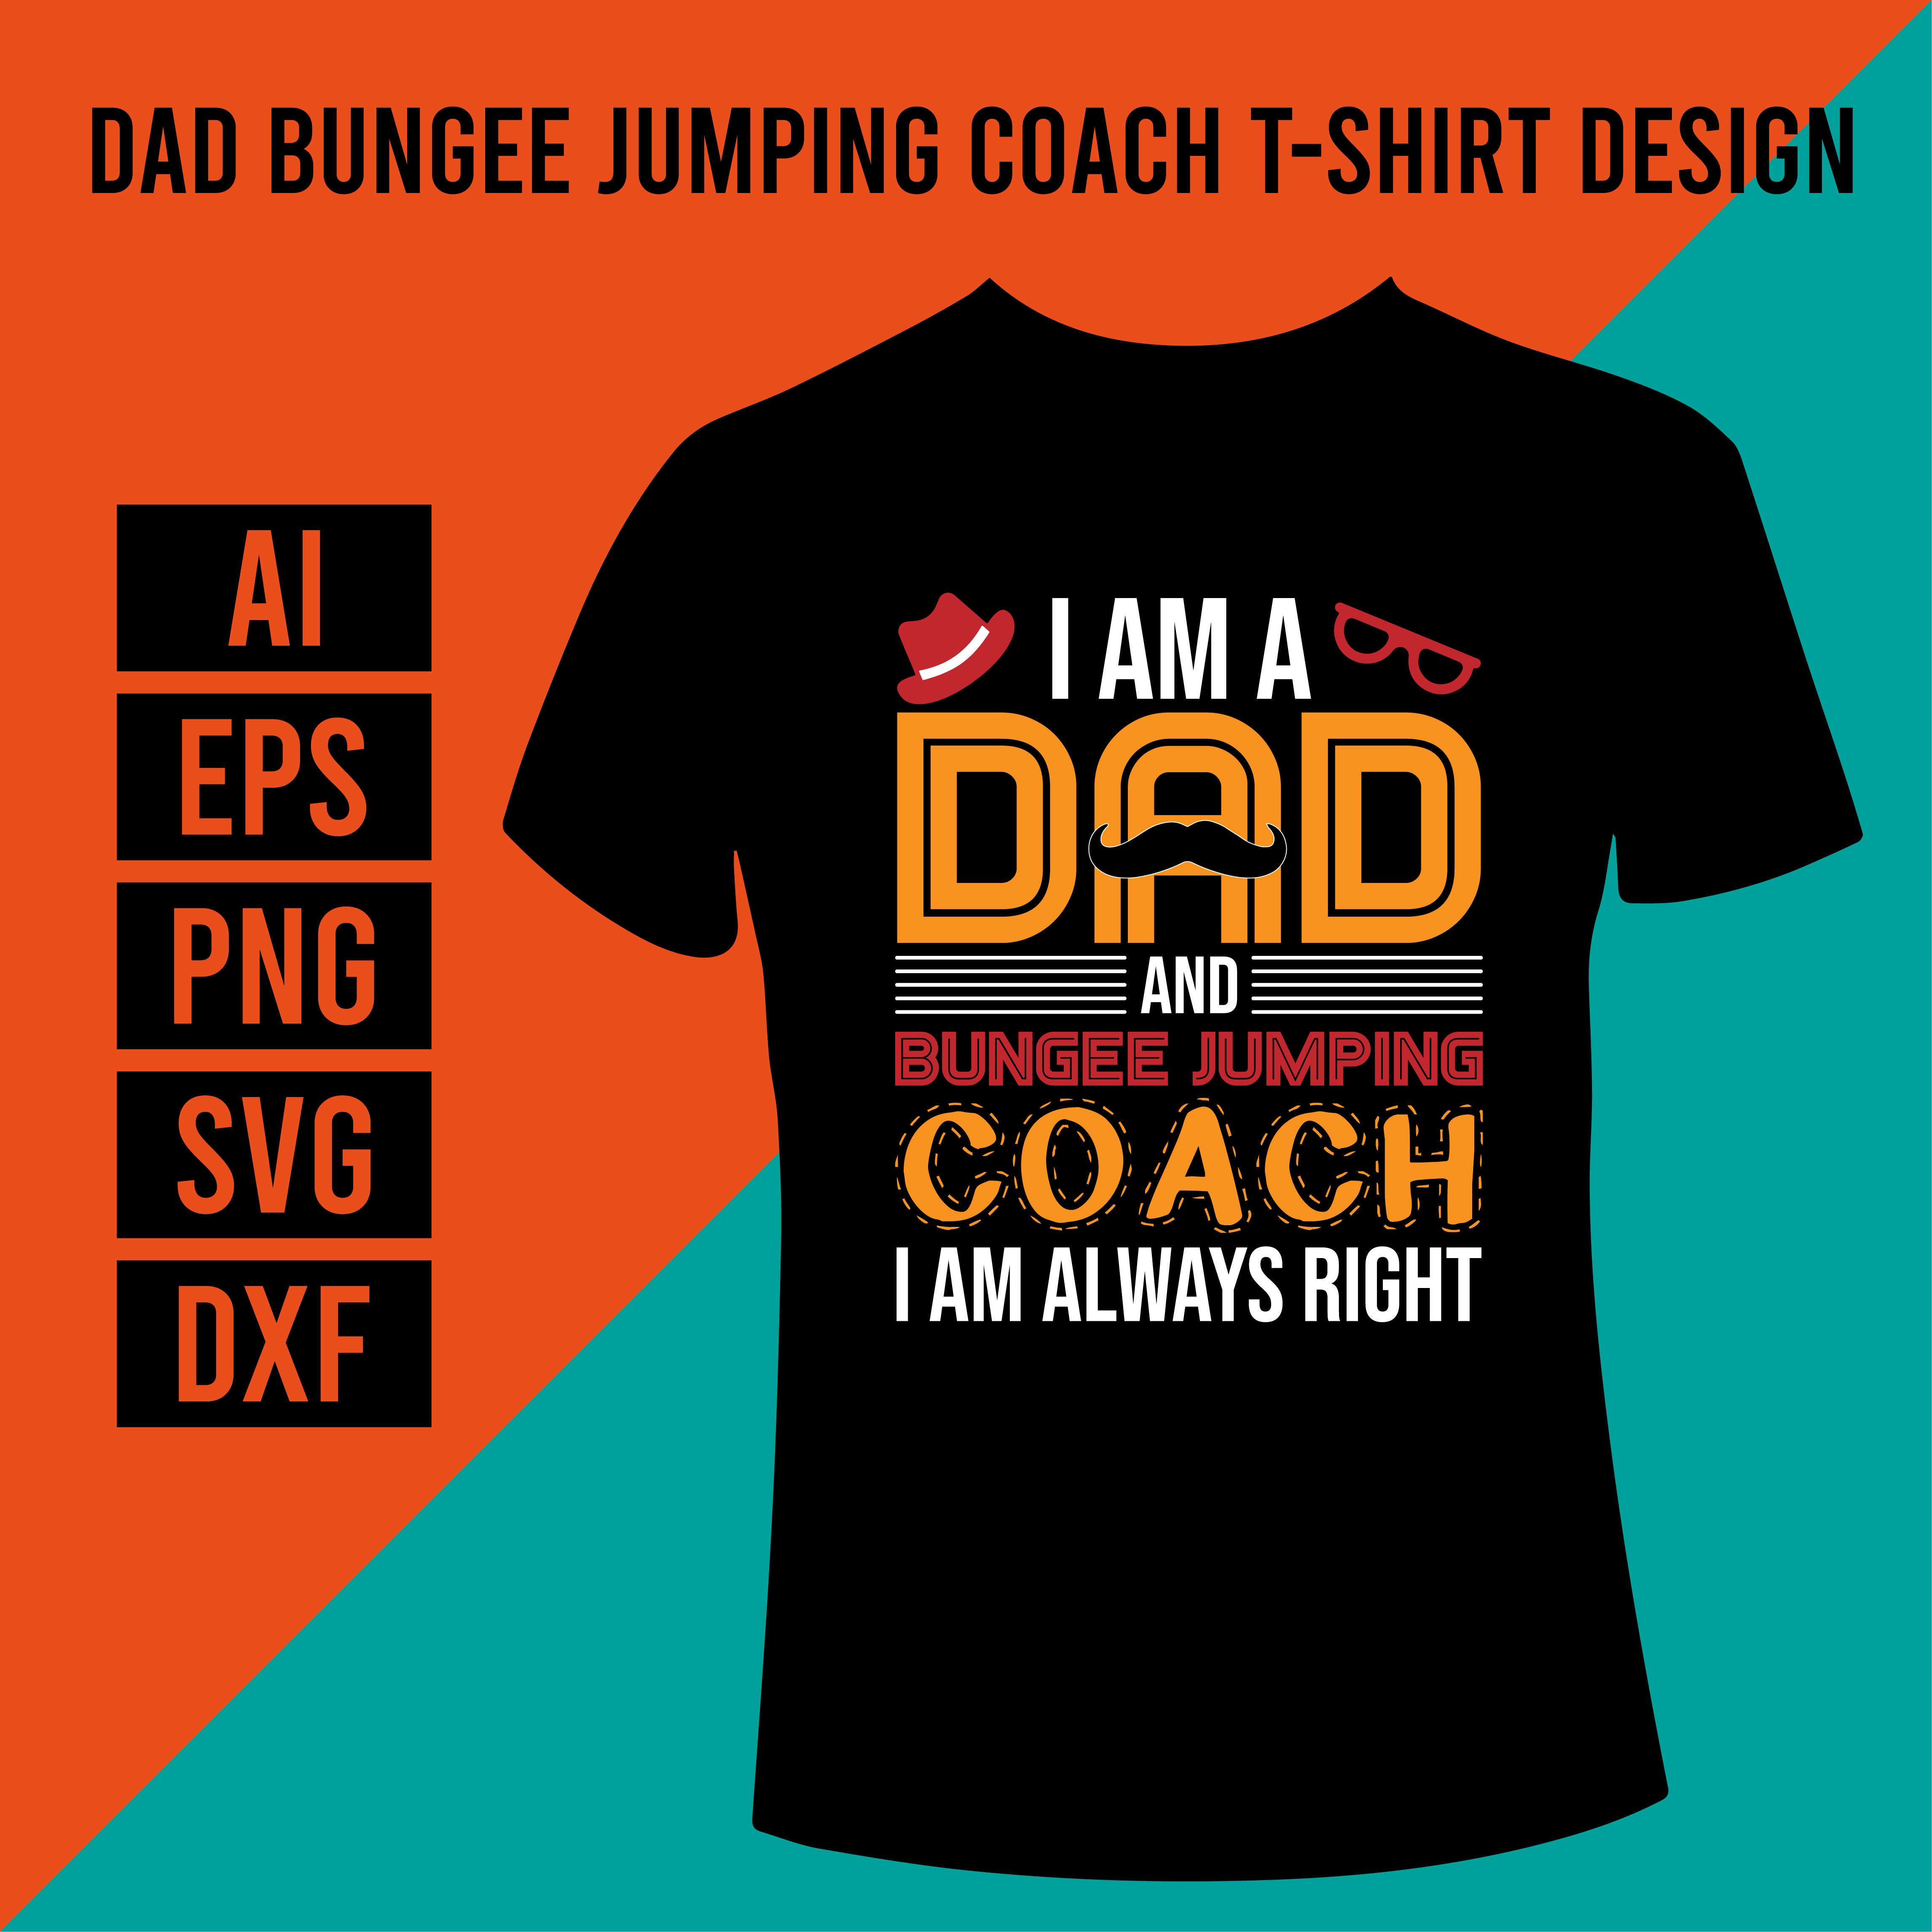 Dad Bungee Jumping Coach T-Shirt Design cover image.